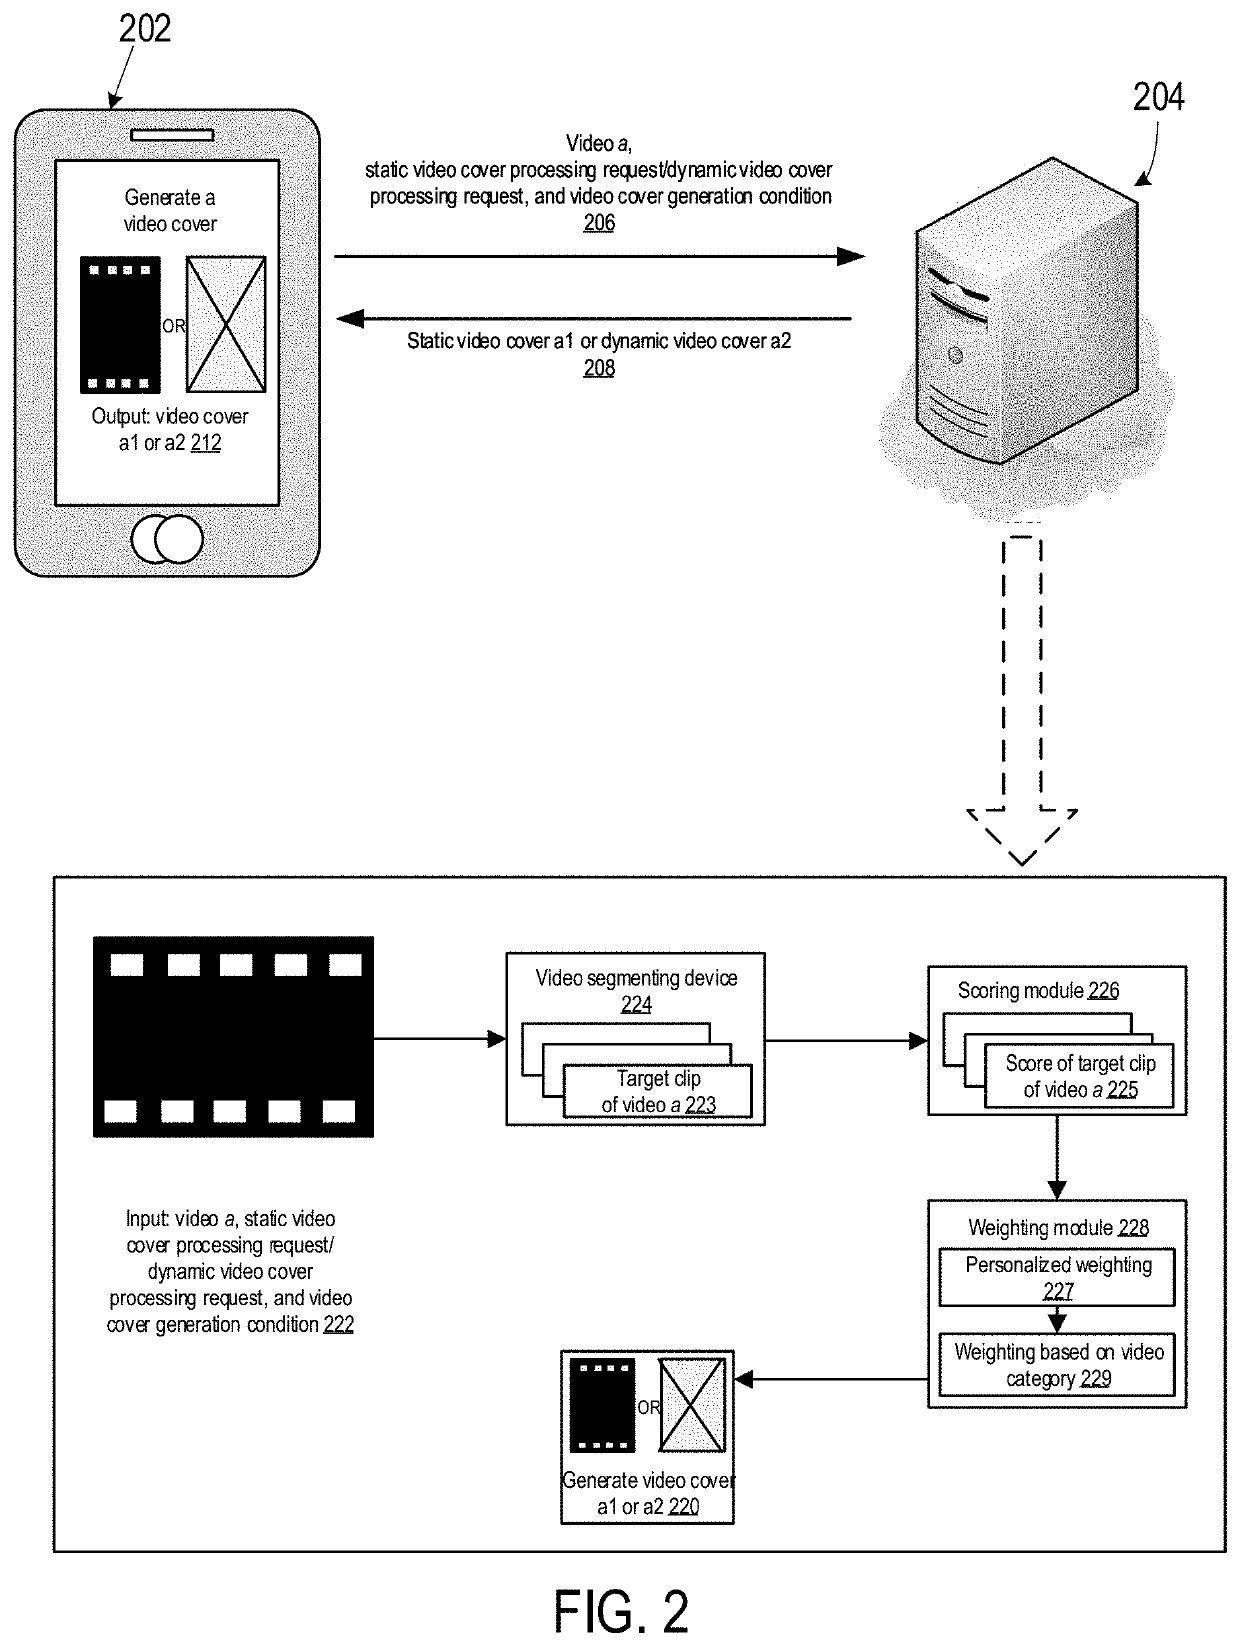 Method and apparatus for data processing, and method and apparatus for video cover generation